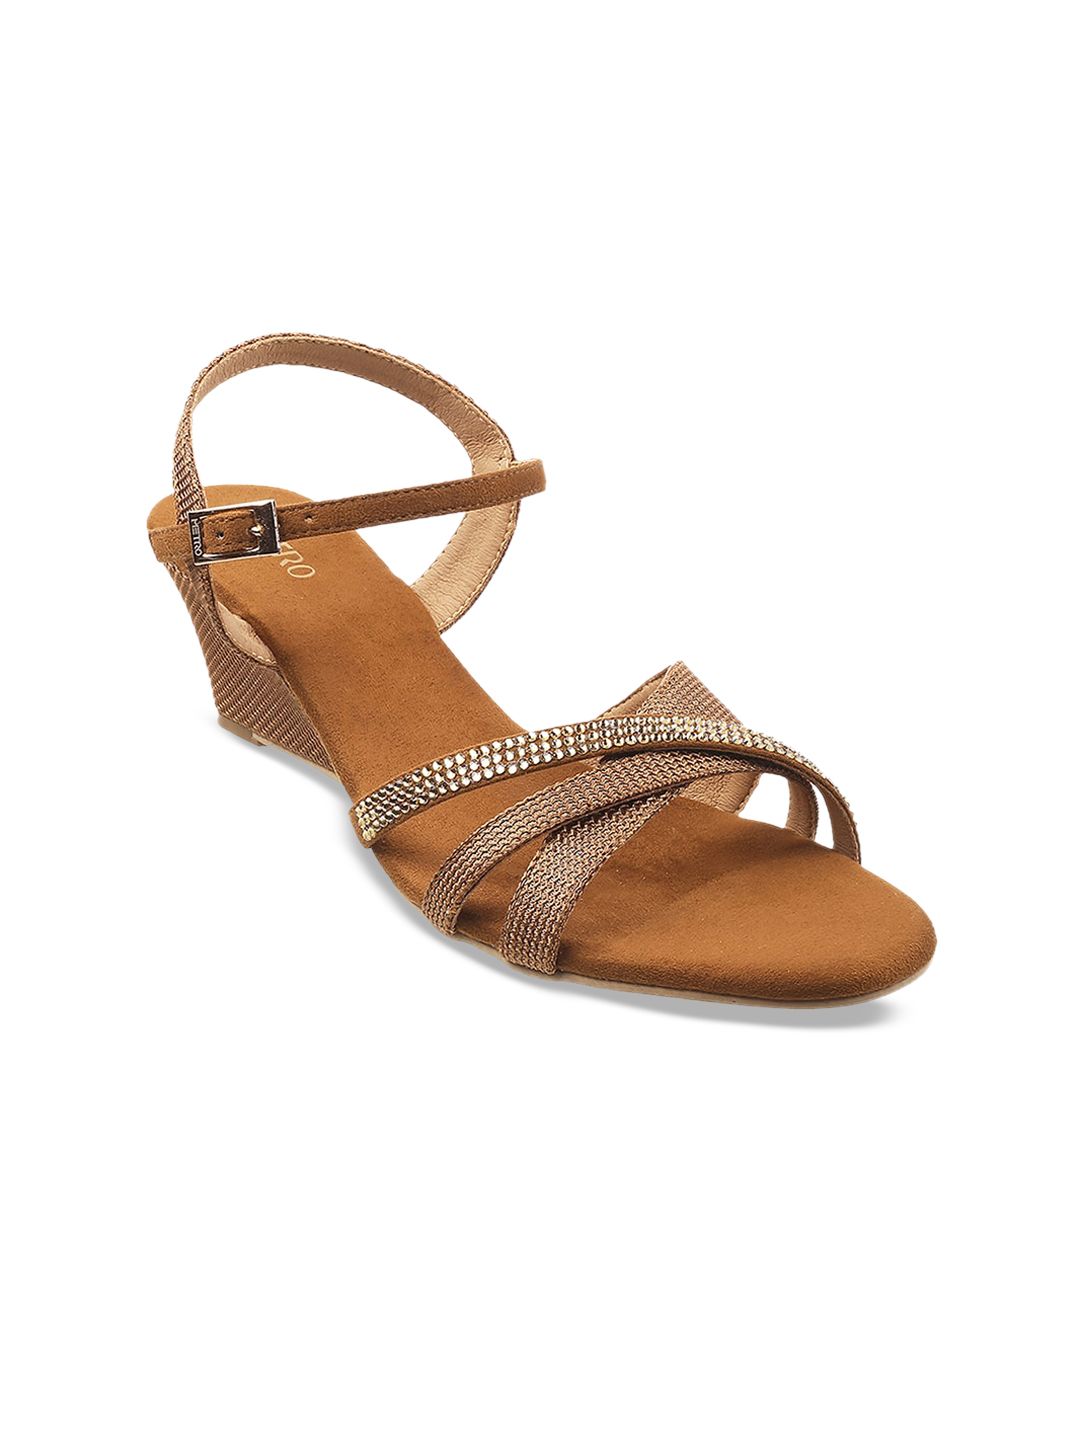 Metro Gold-Toned Embellished Wedge Sandals Price in India